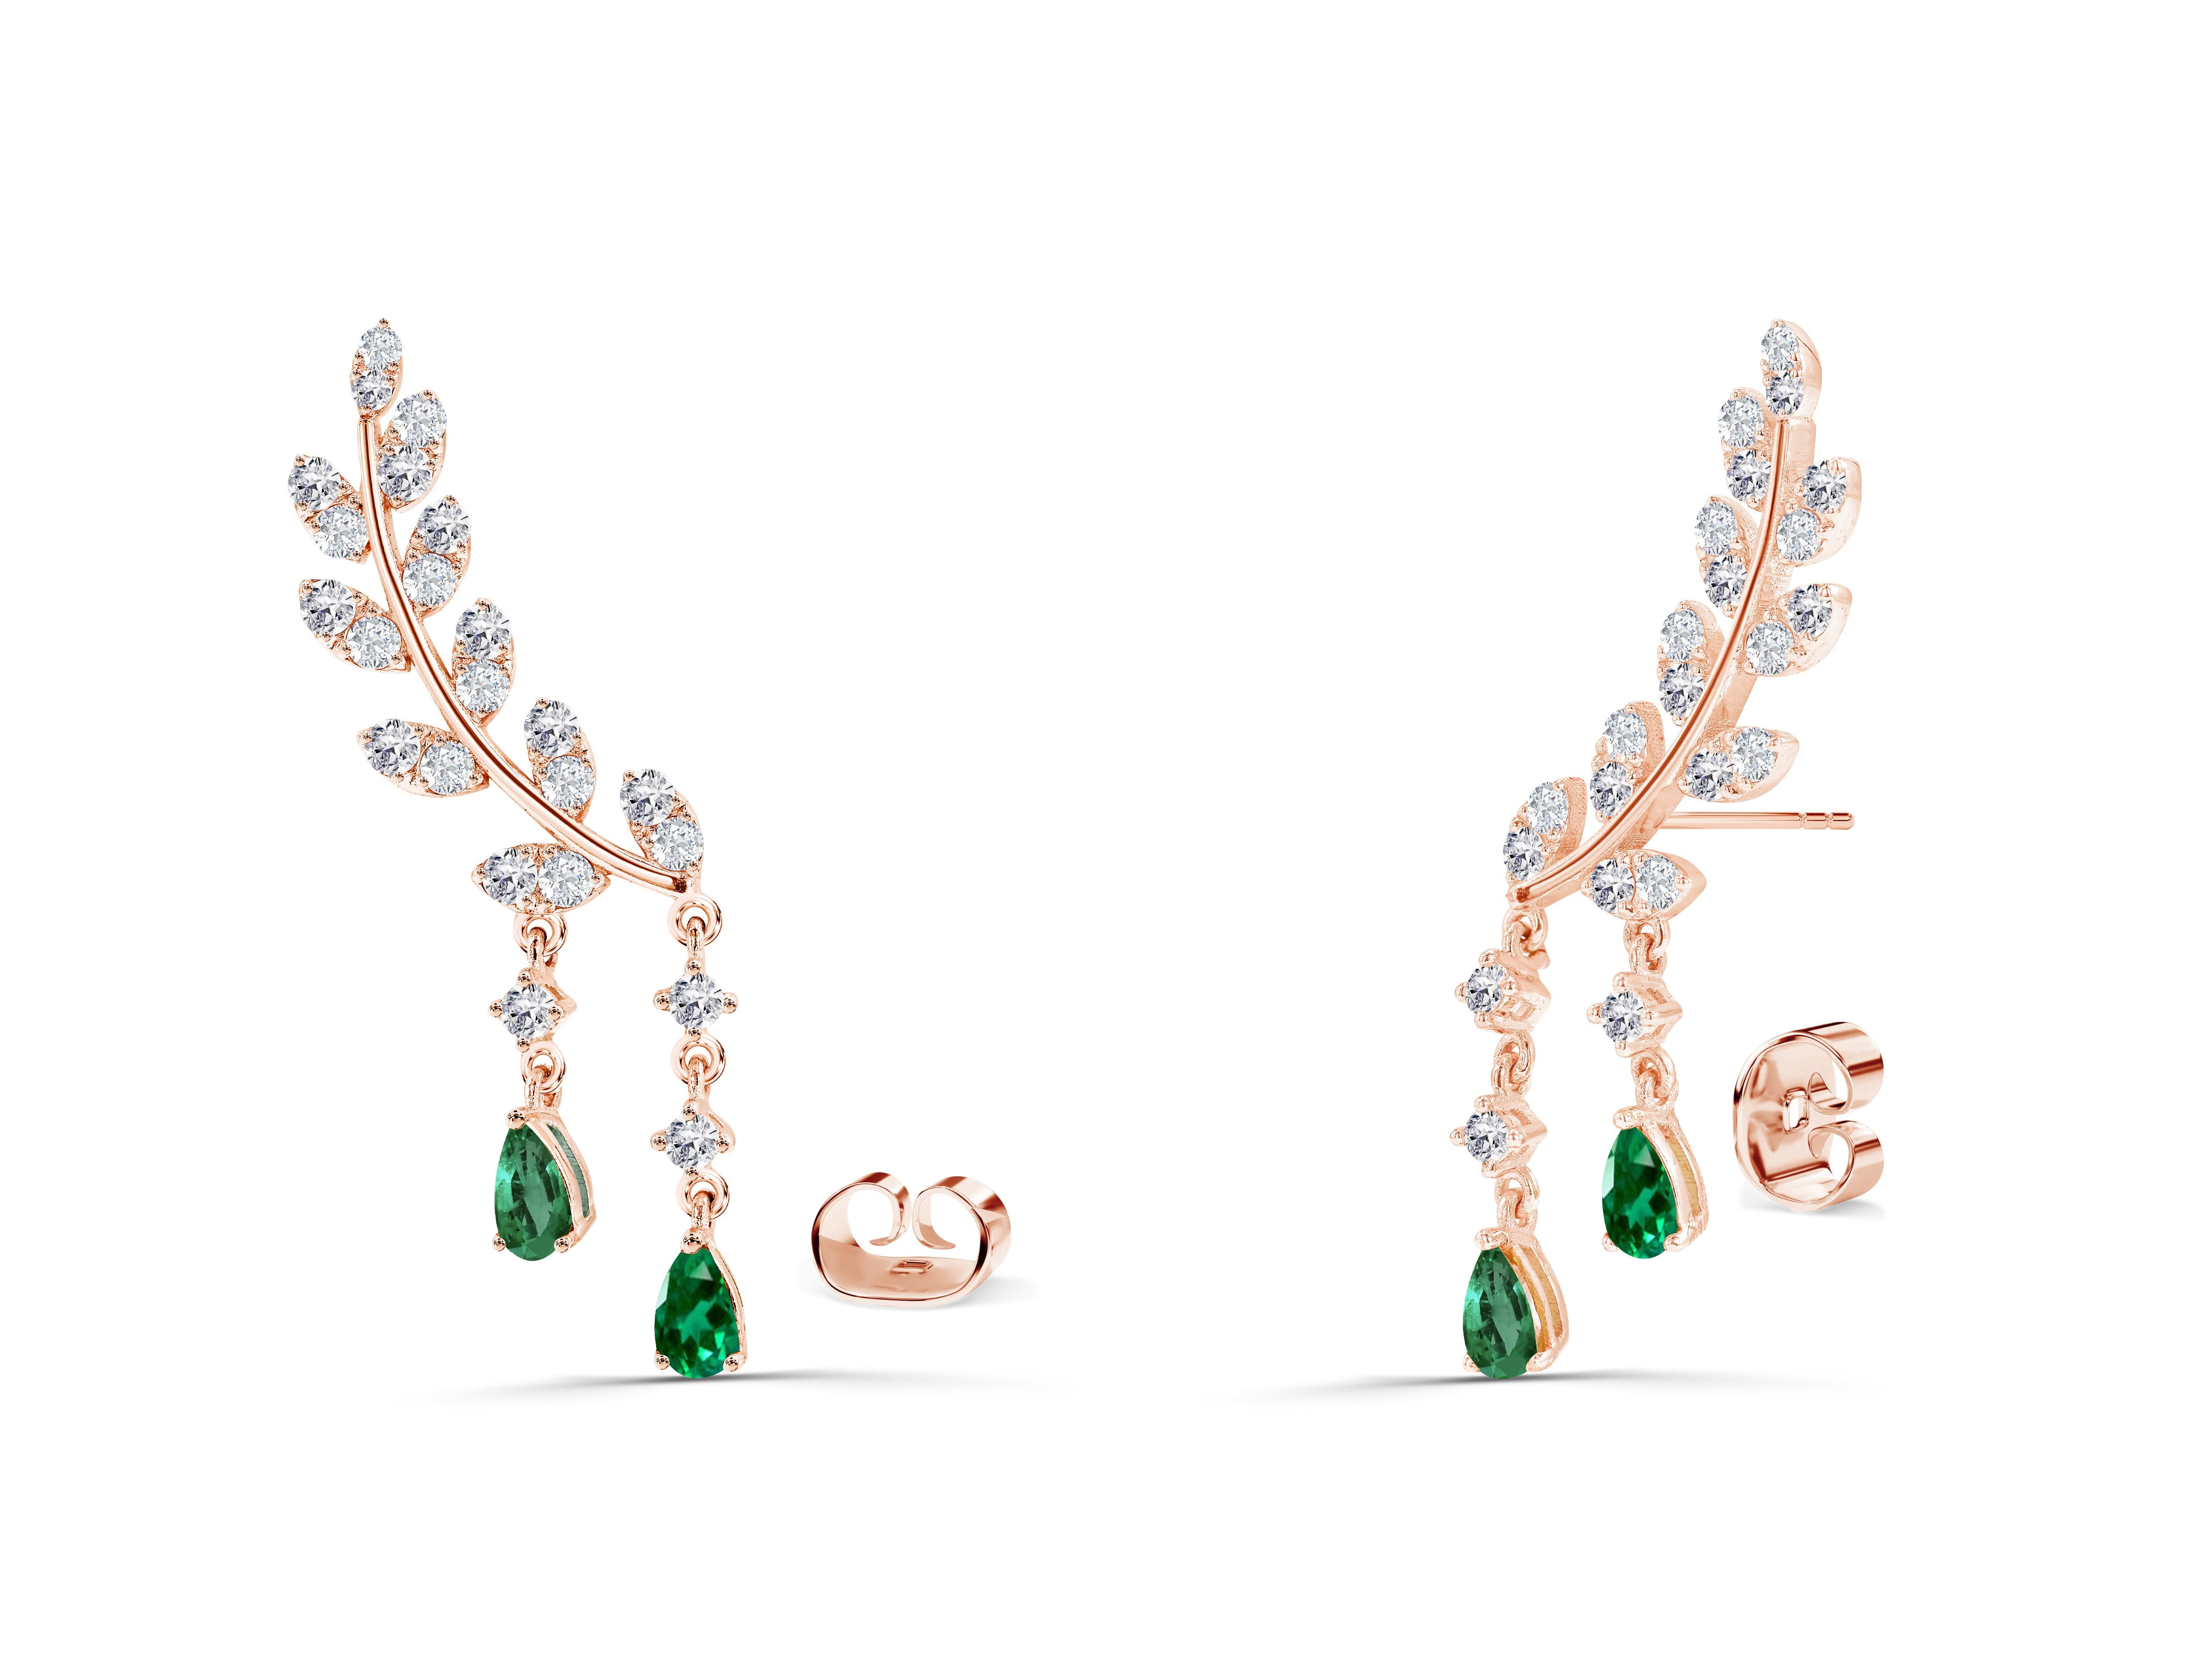 2.25Ct Diamond and Emerald Drop Earrings in 14K Gold, Round Brilliant cut diamond earrings, Natural Diamond Earrings, Cluster Stud earrings, Heavy End Earrings.

Oshi Jewels presents to you a beautiful Earring collection with natural diamonds that